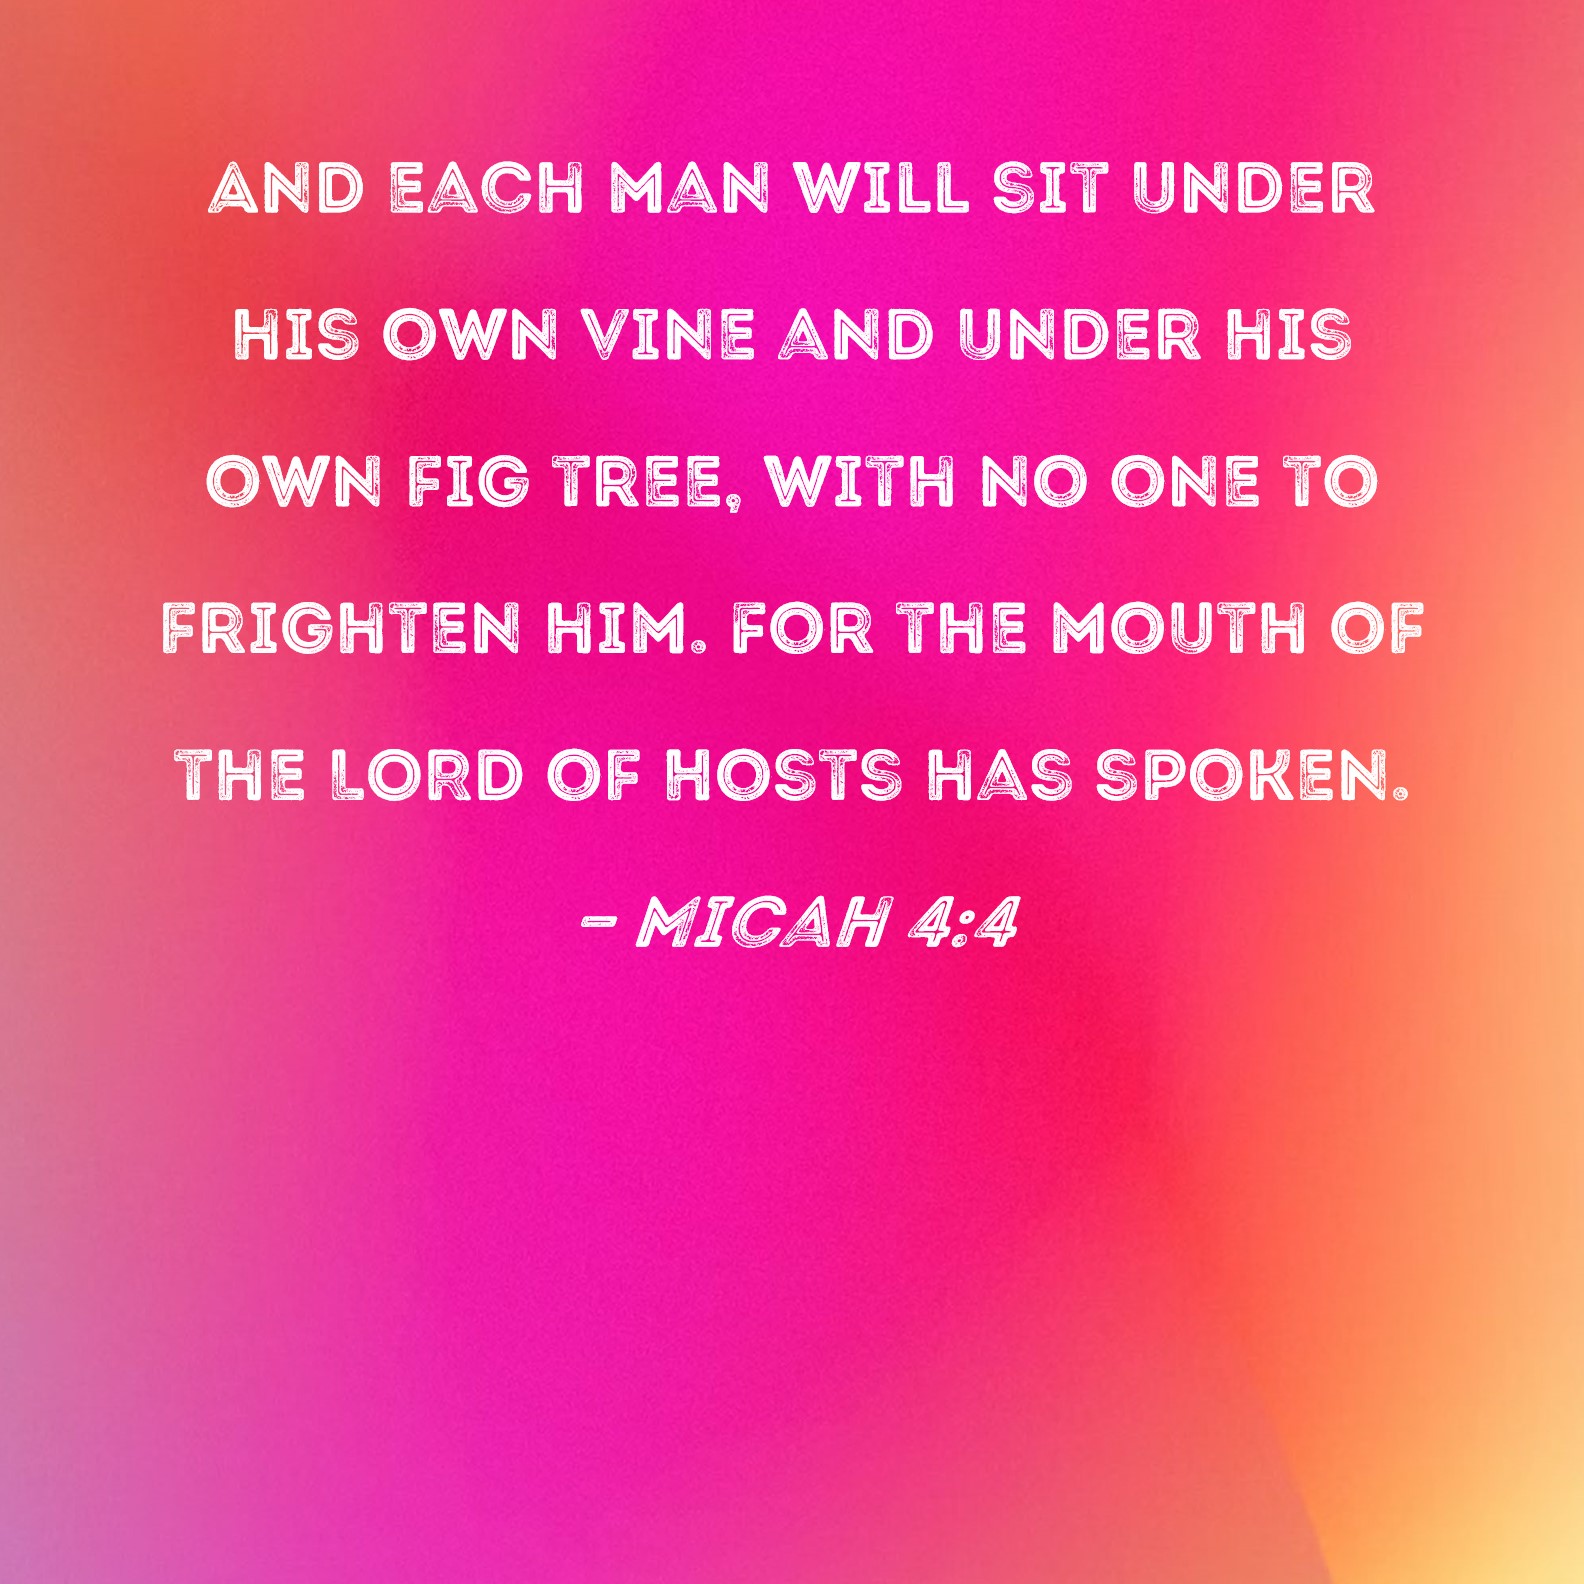 Micah 4:4 And each man will sit under his own vine and under his own fig  tree, with no one to frighten him. For the mouth of the LORD of Hosts has